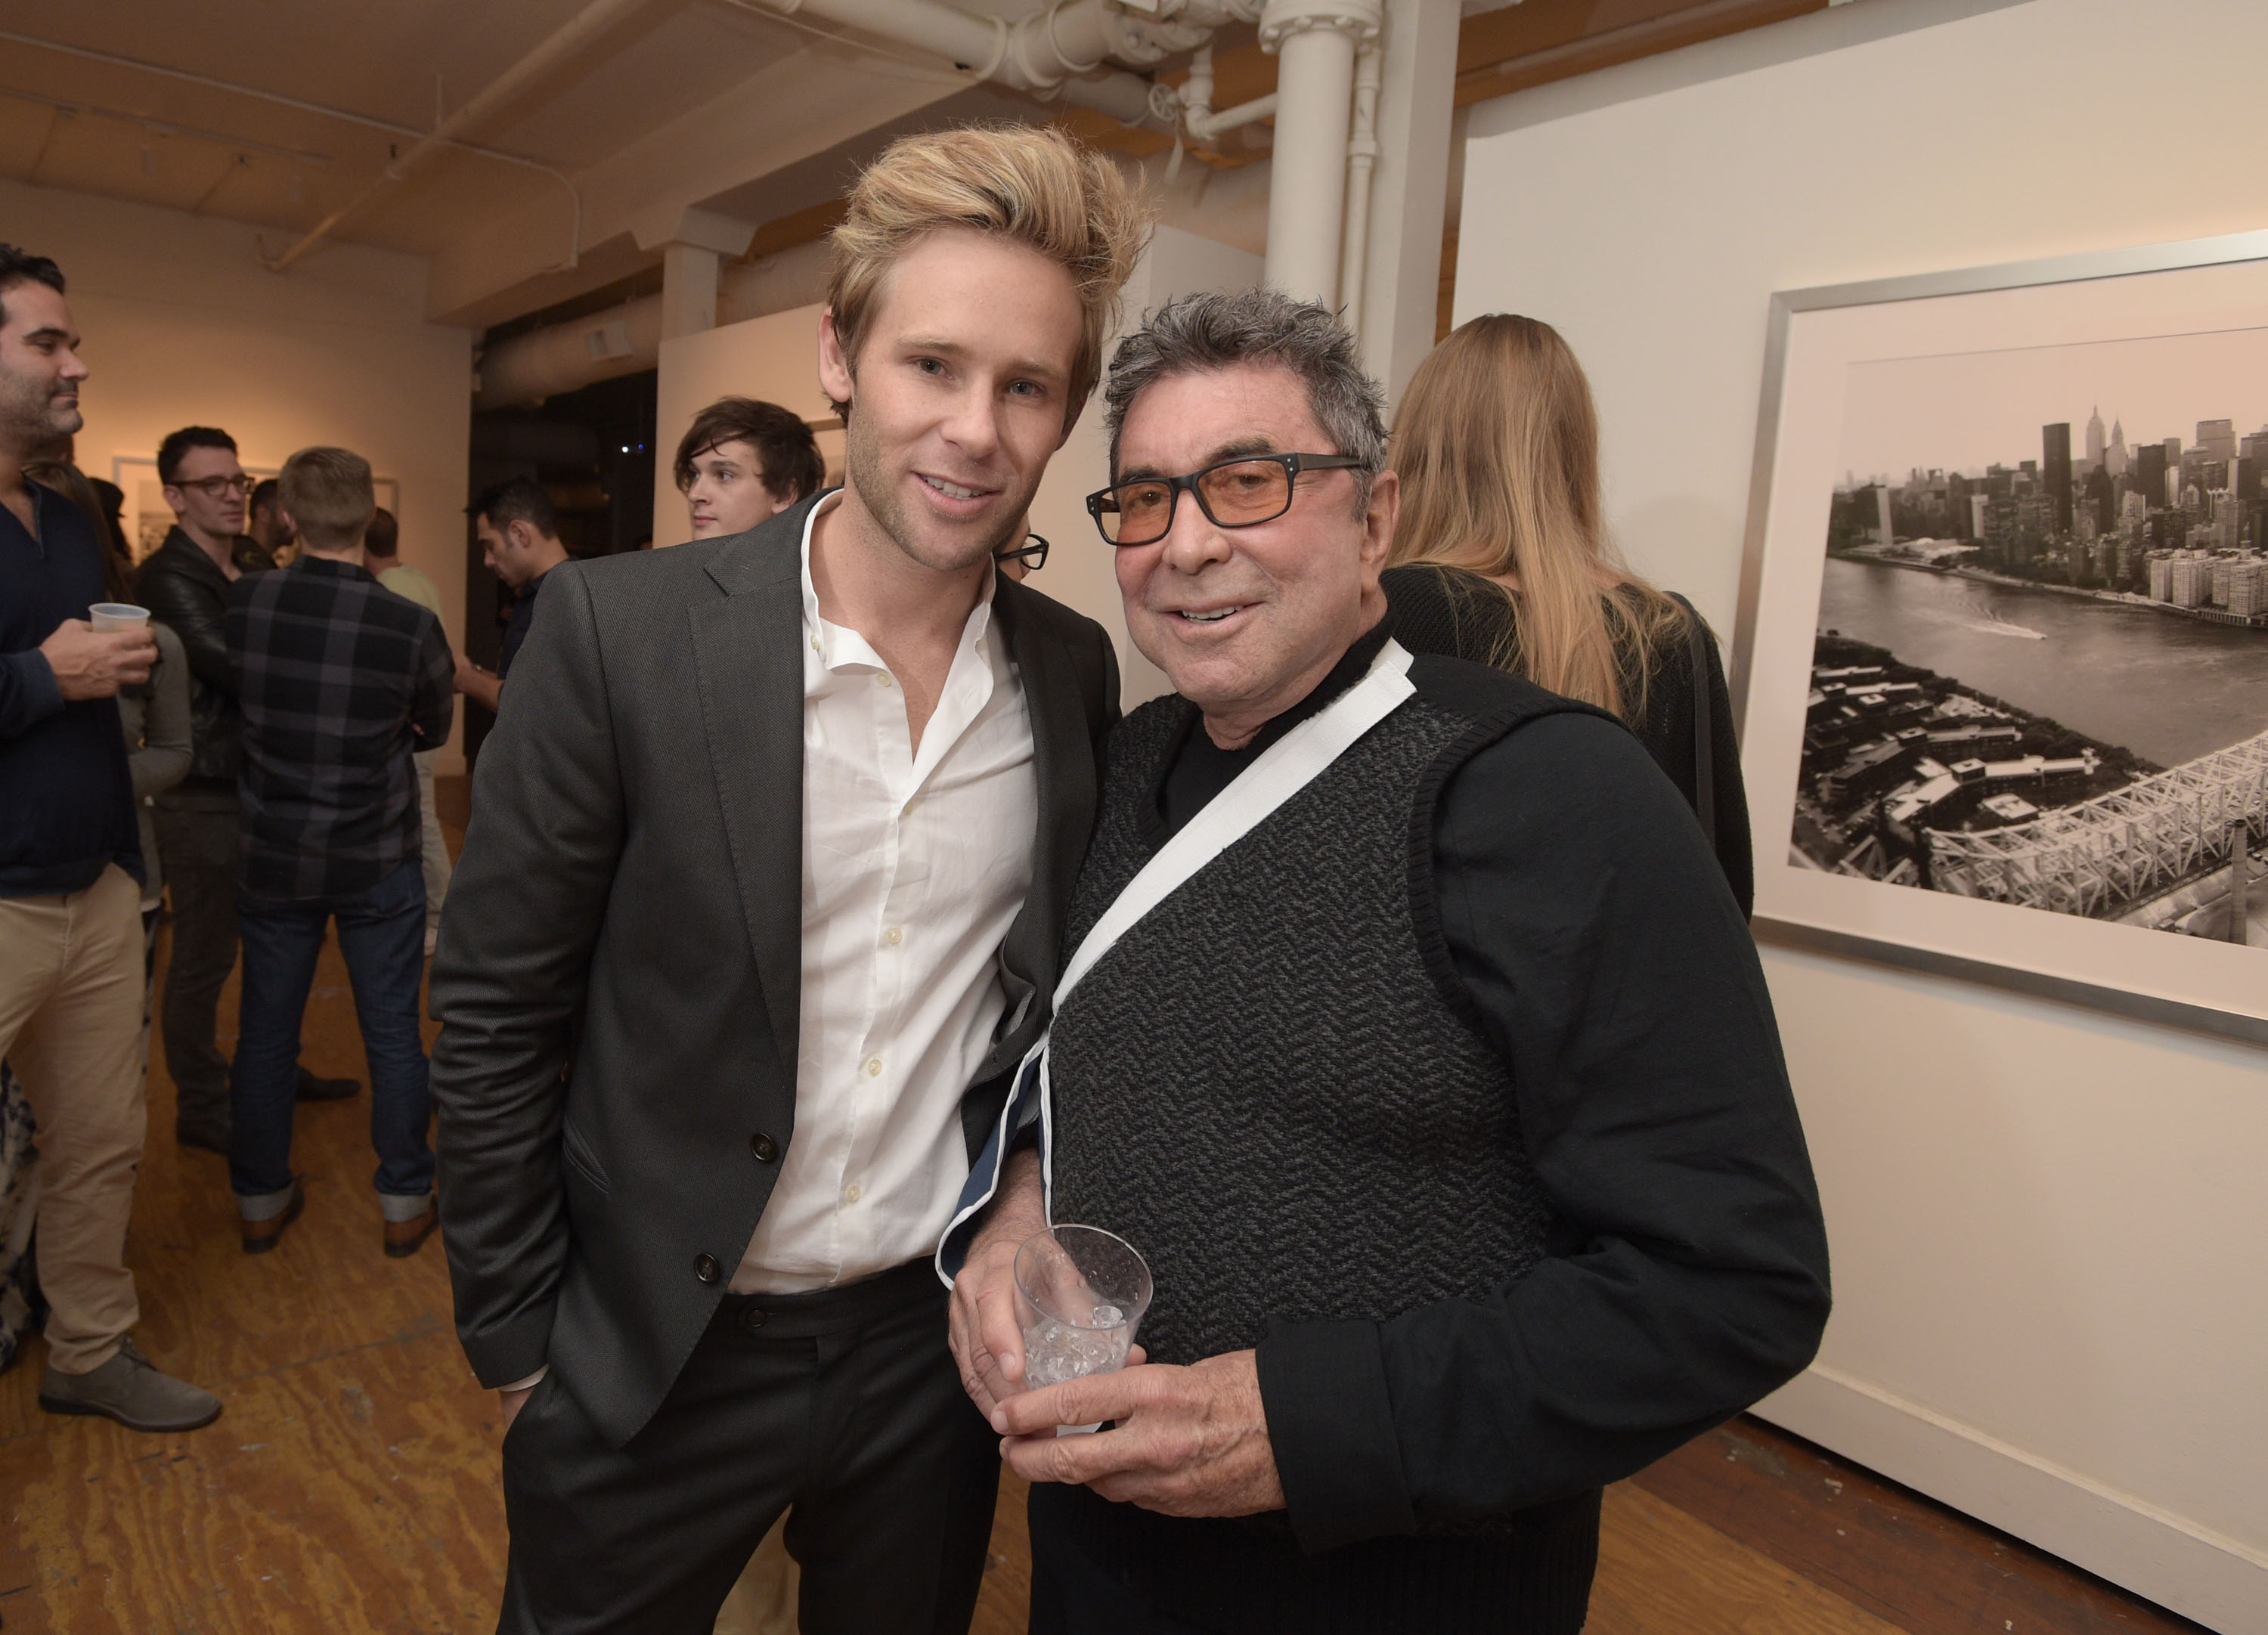 LOS ANGELES, CA - MAY 09: Artist Bryan Fox (L) and producer Sandy Gallin attend We. Alone. a photography exhibit by Bryan Fox at Think Tank Gallery on May 9, 2015 in Los Angeles, California. (Photo by Jason Kempin/Getty Images for Bryan Fox)